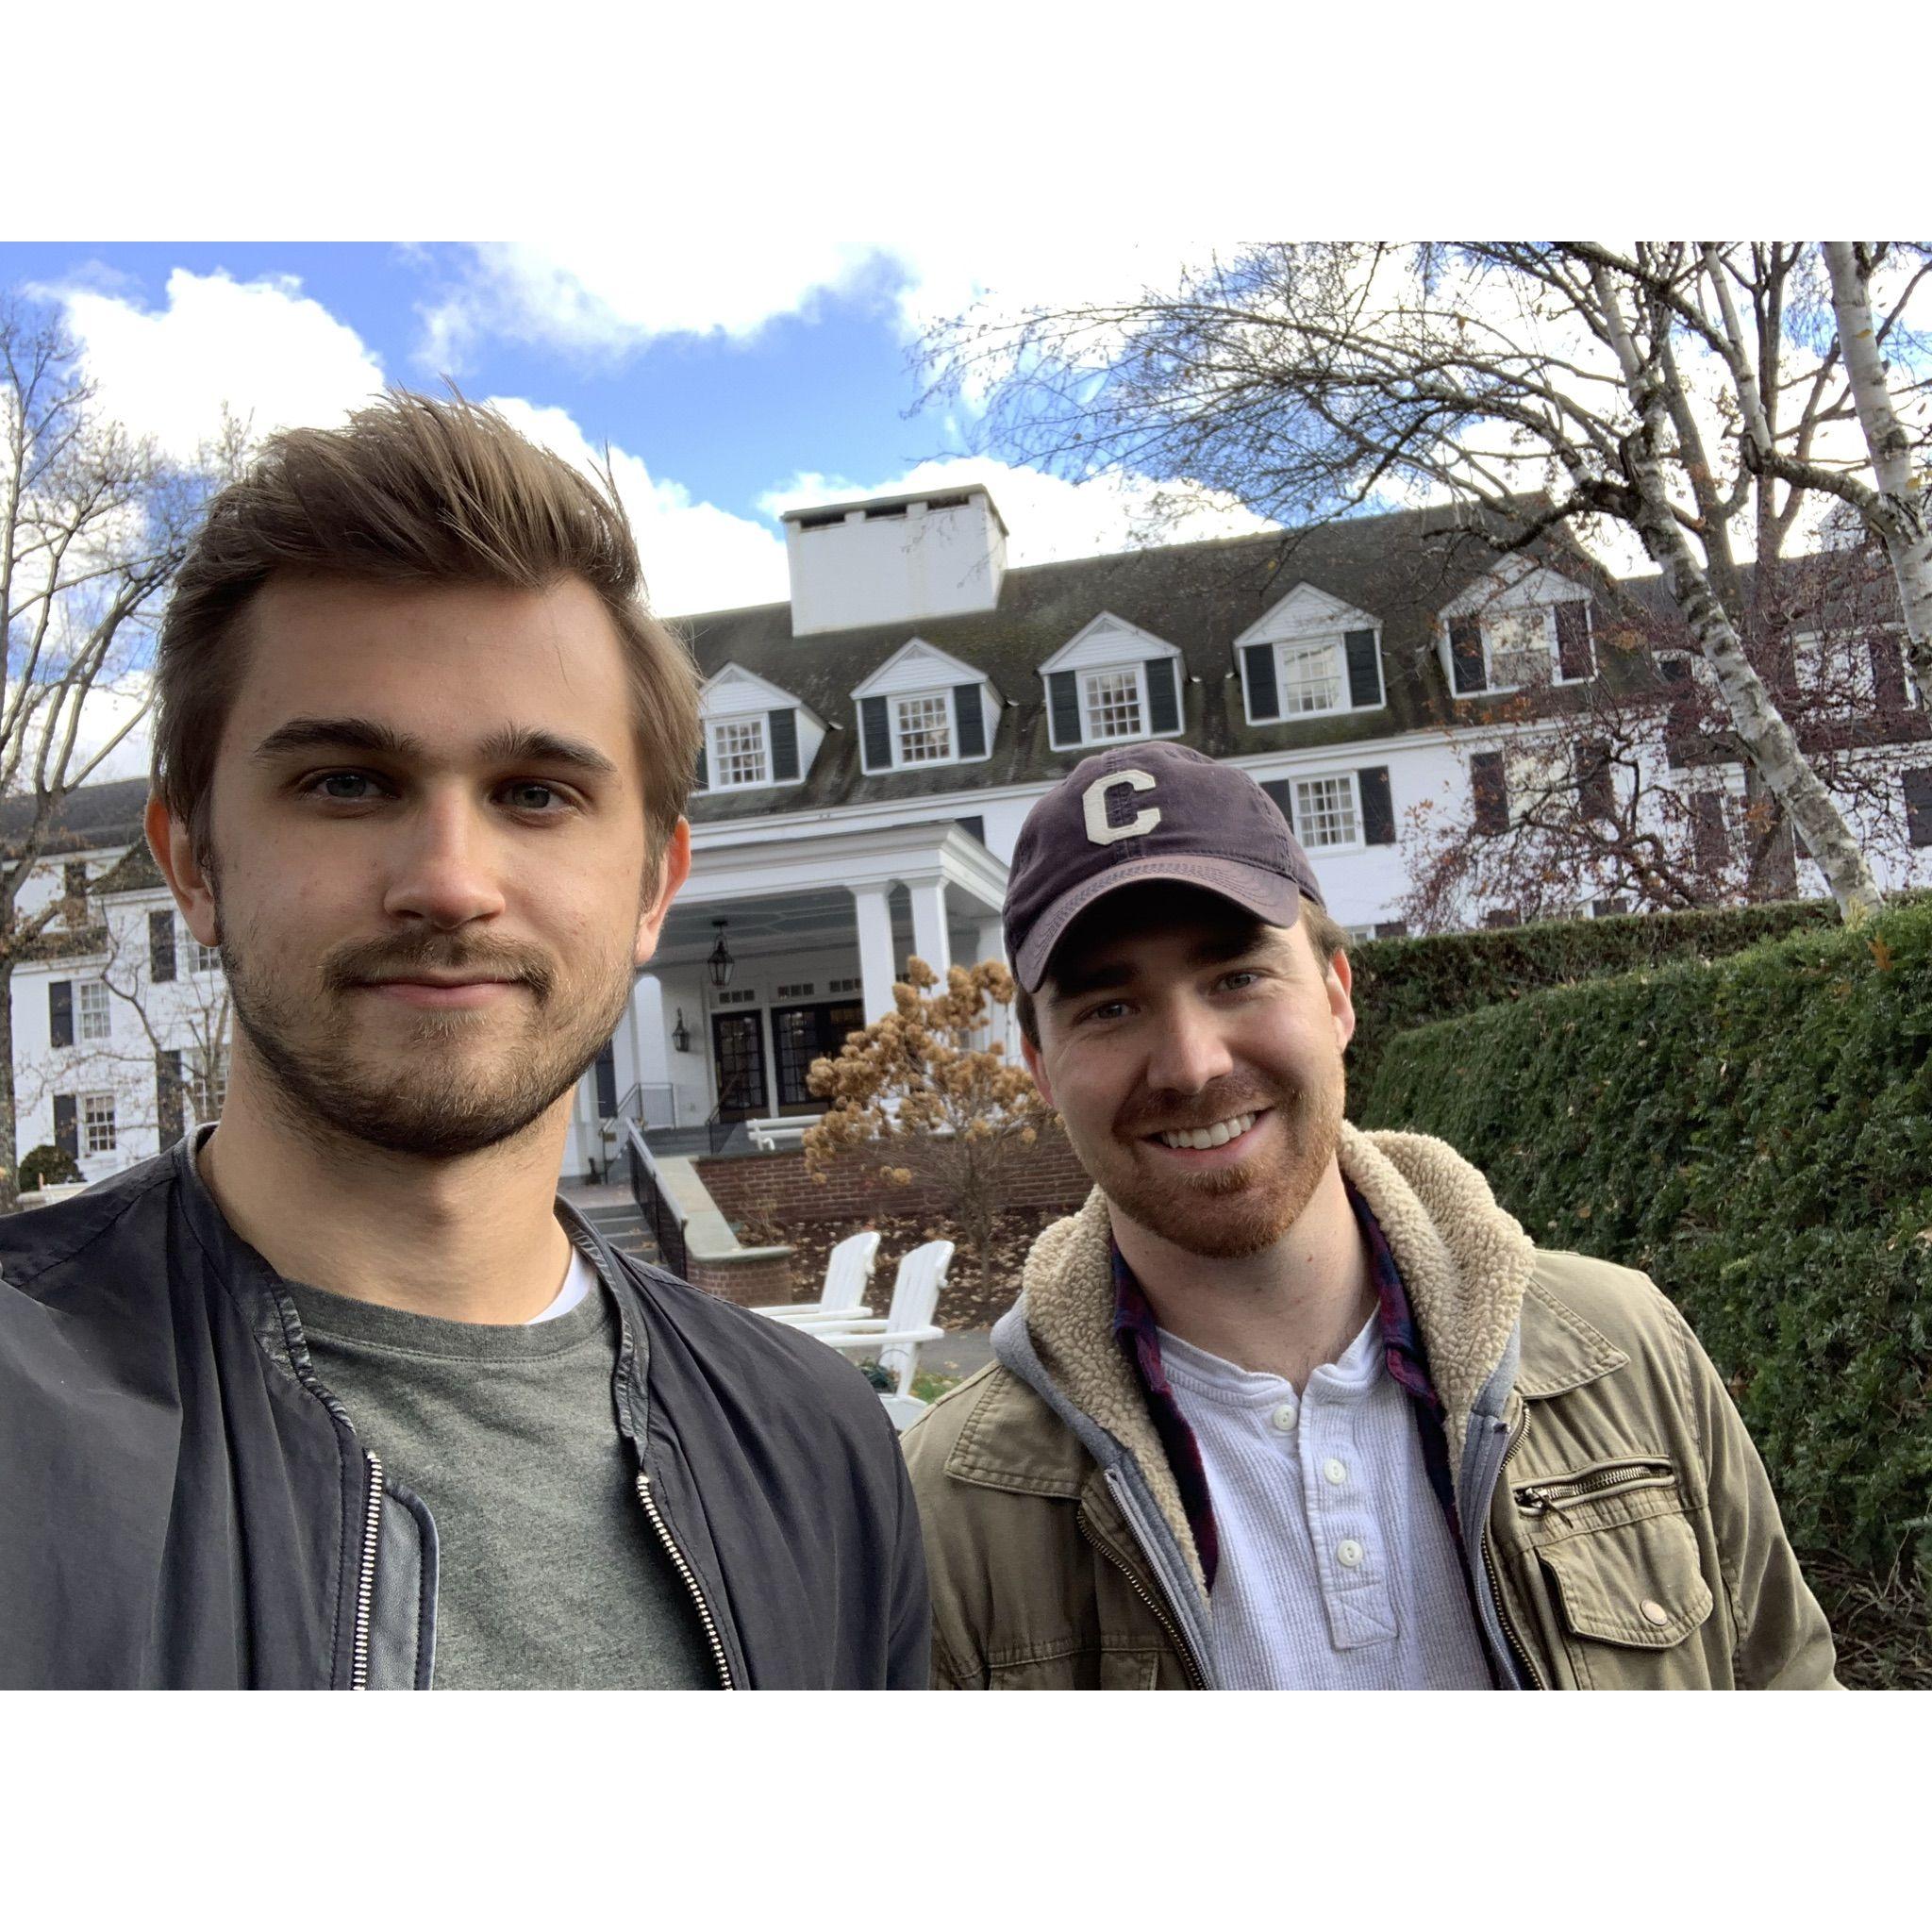 Catching Up: In 2021, Connor and Michael were able to travel together to some of the most meaningful places in their lives, like Charleston; Boston; Quechee, VT (pictured); NYC; and Long Island.